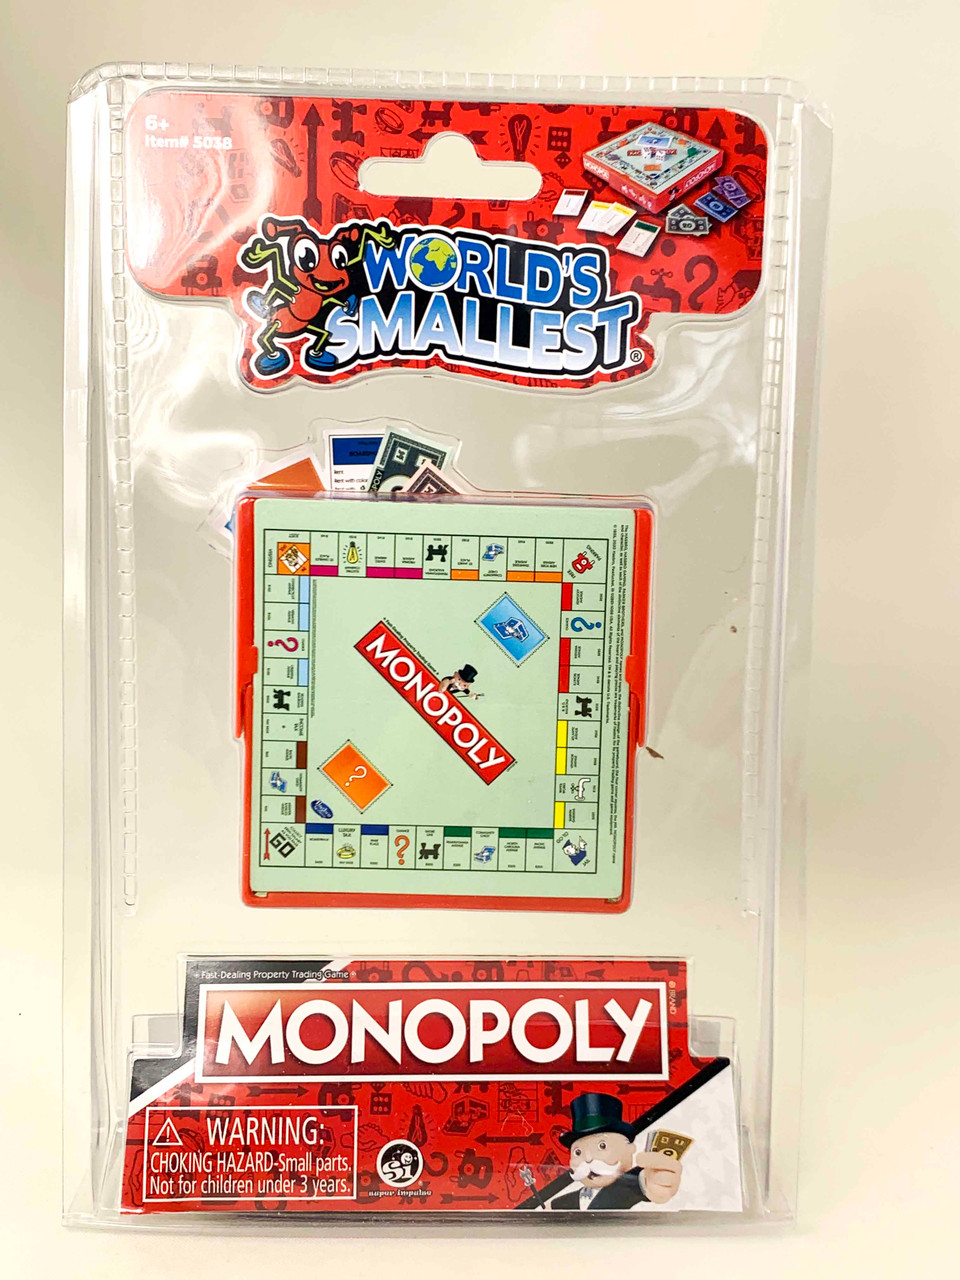 https://cdn11.bigcommerce.com/s-aqhrs1x7/images/stencil/1280x1280/products/3009/7331/TY0226800_monopoly_1__48322.1704237142.jpg?c=2